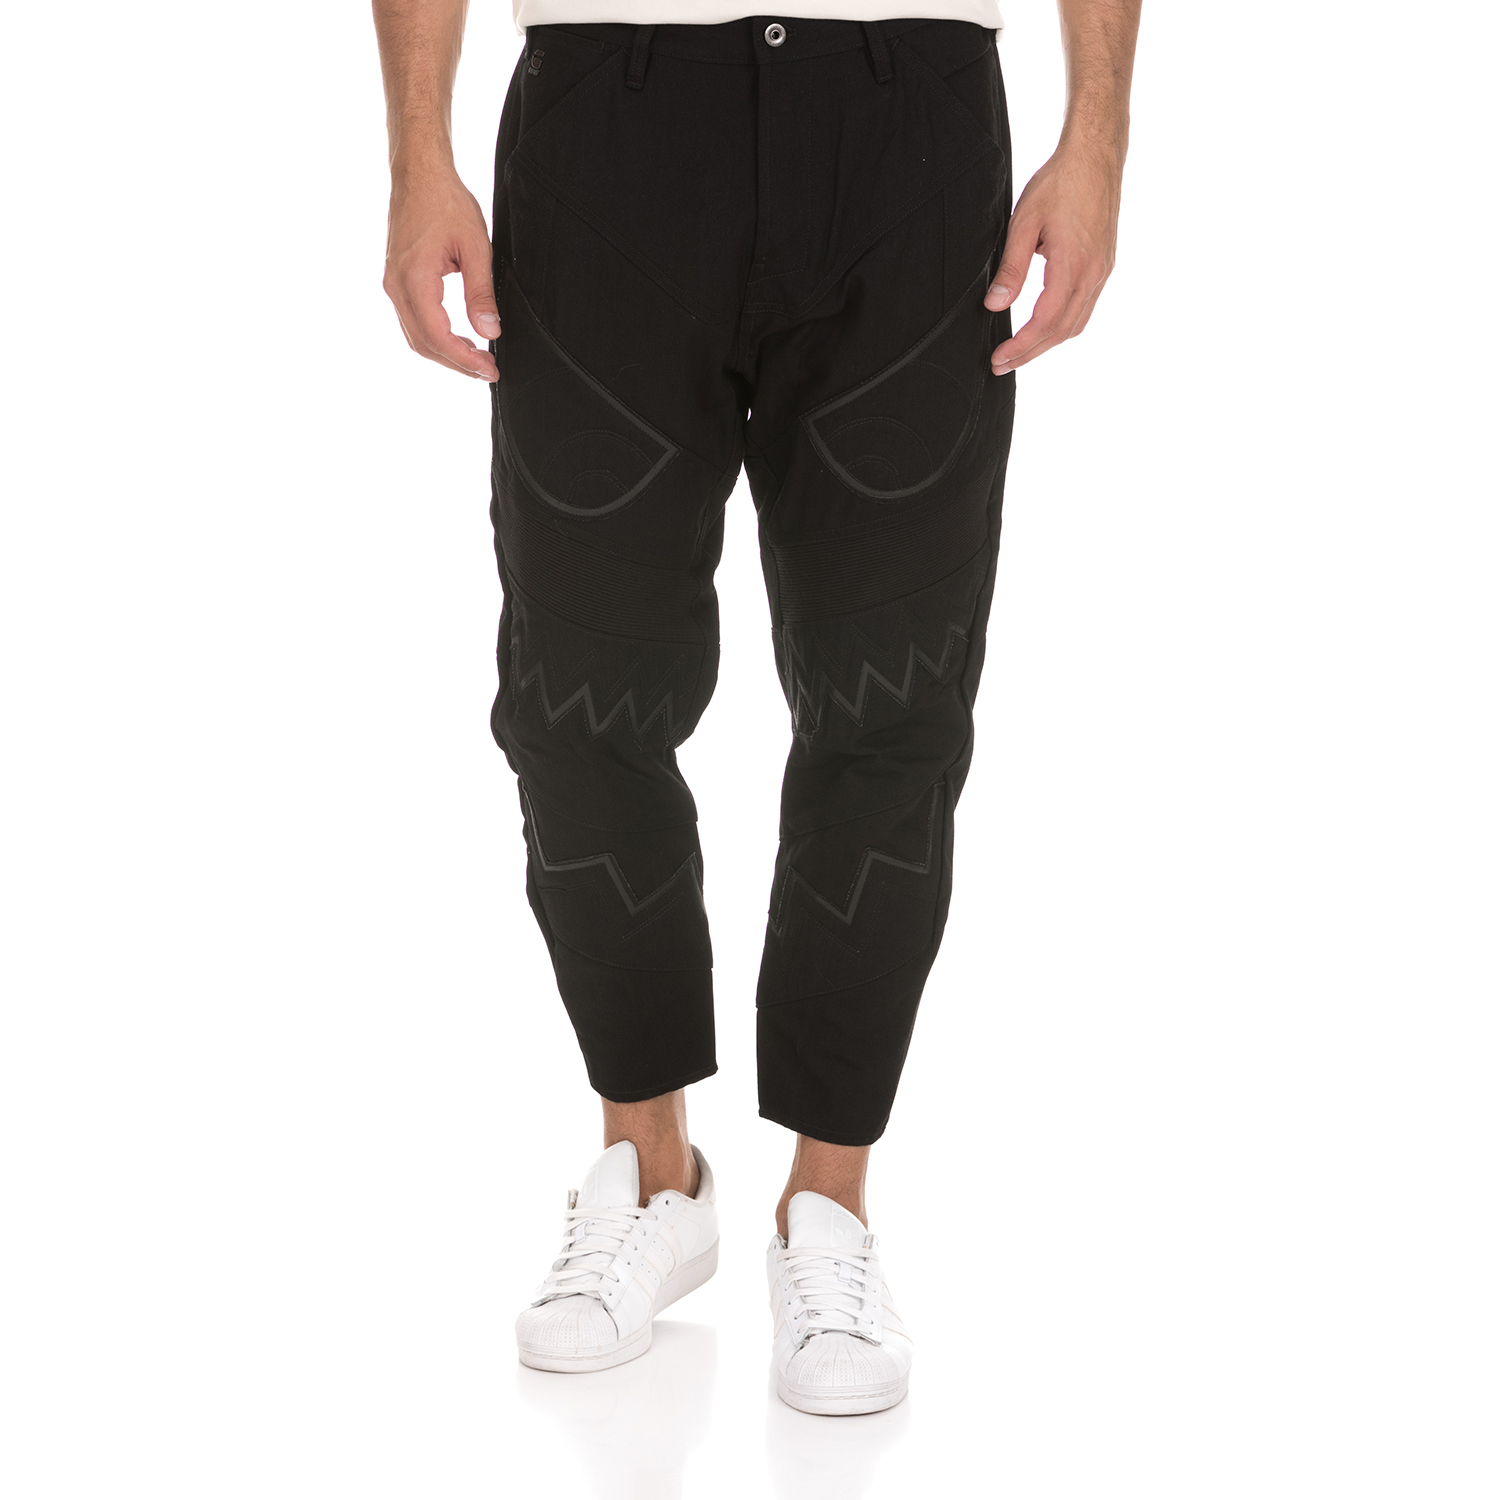 G-STAR RAW Ανδρικό παντελόνι MOTAC-X DECONSTRUCTED RELAXED G-STAR RAW μαύρο